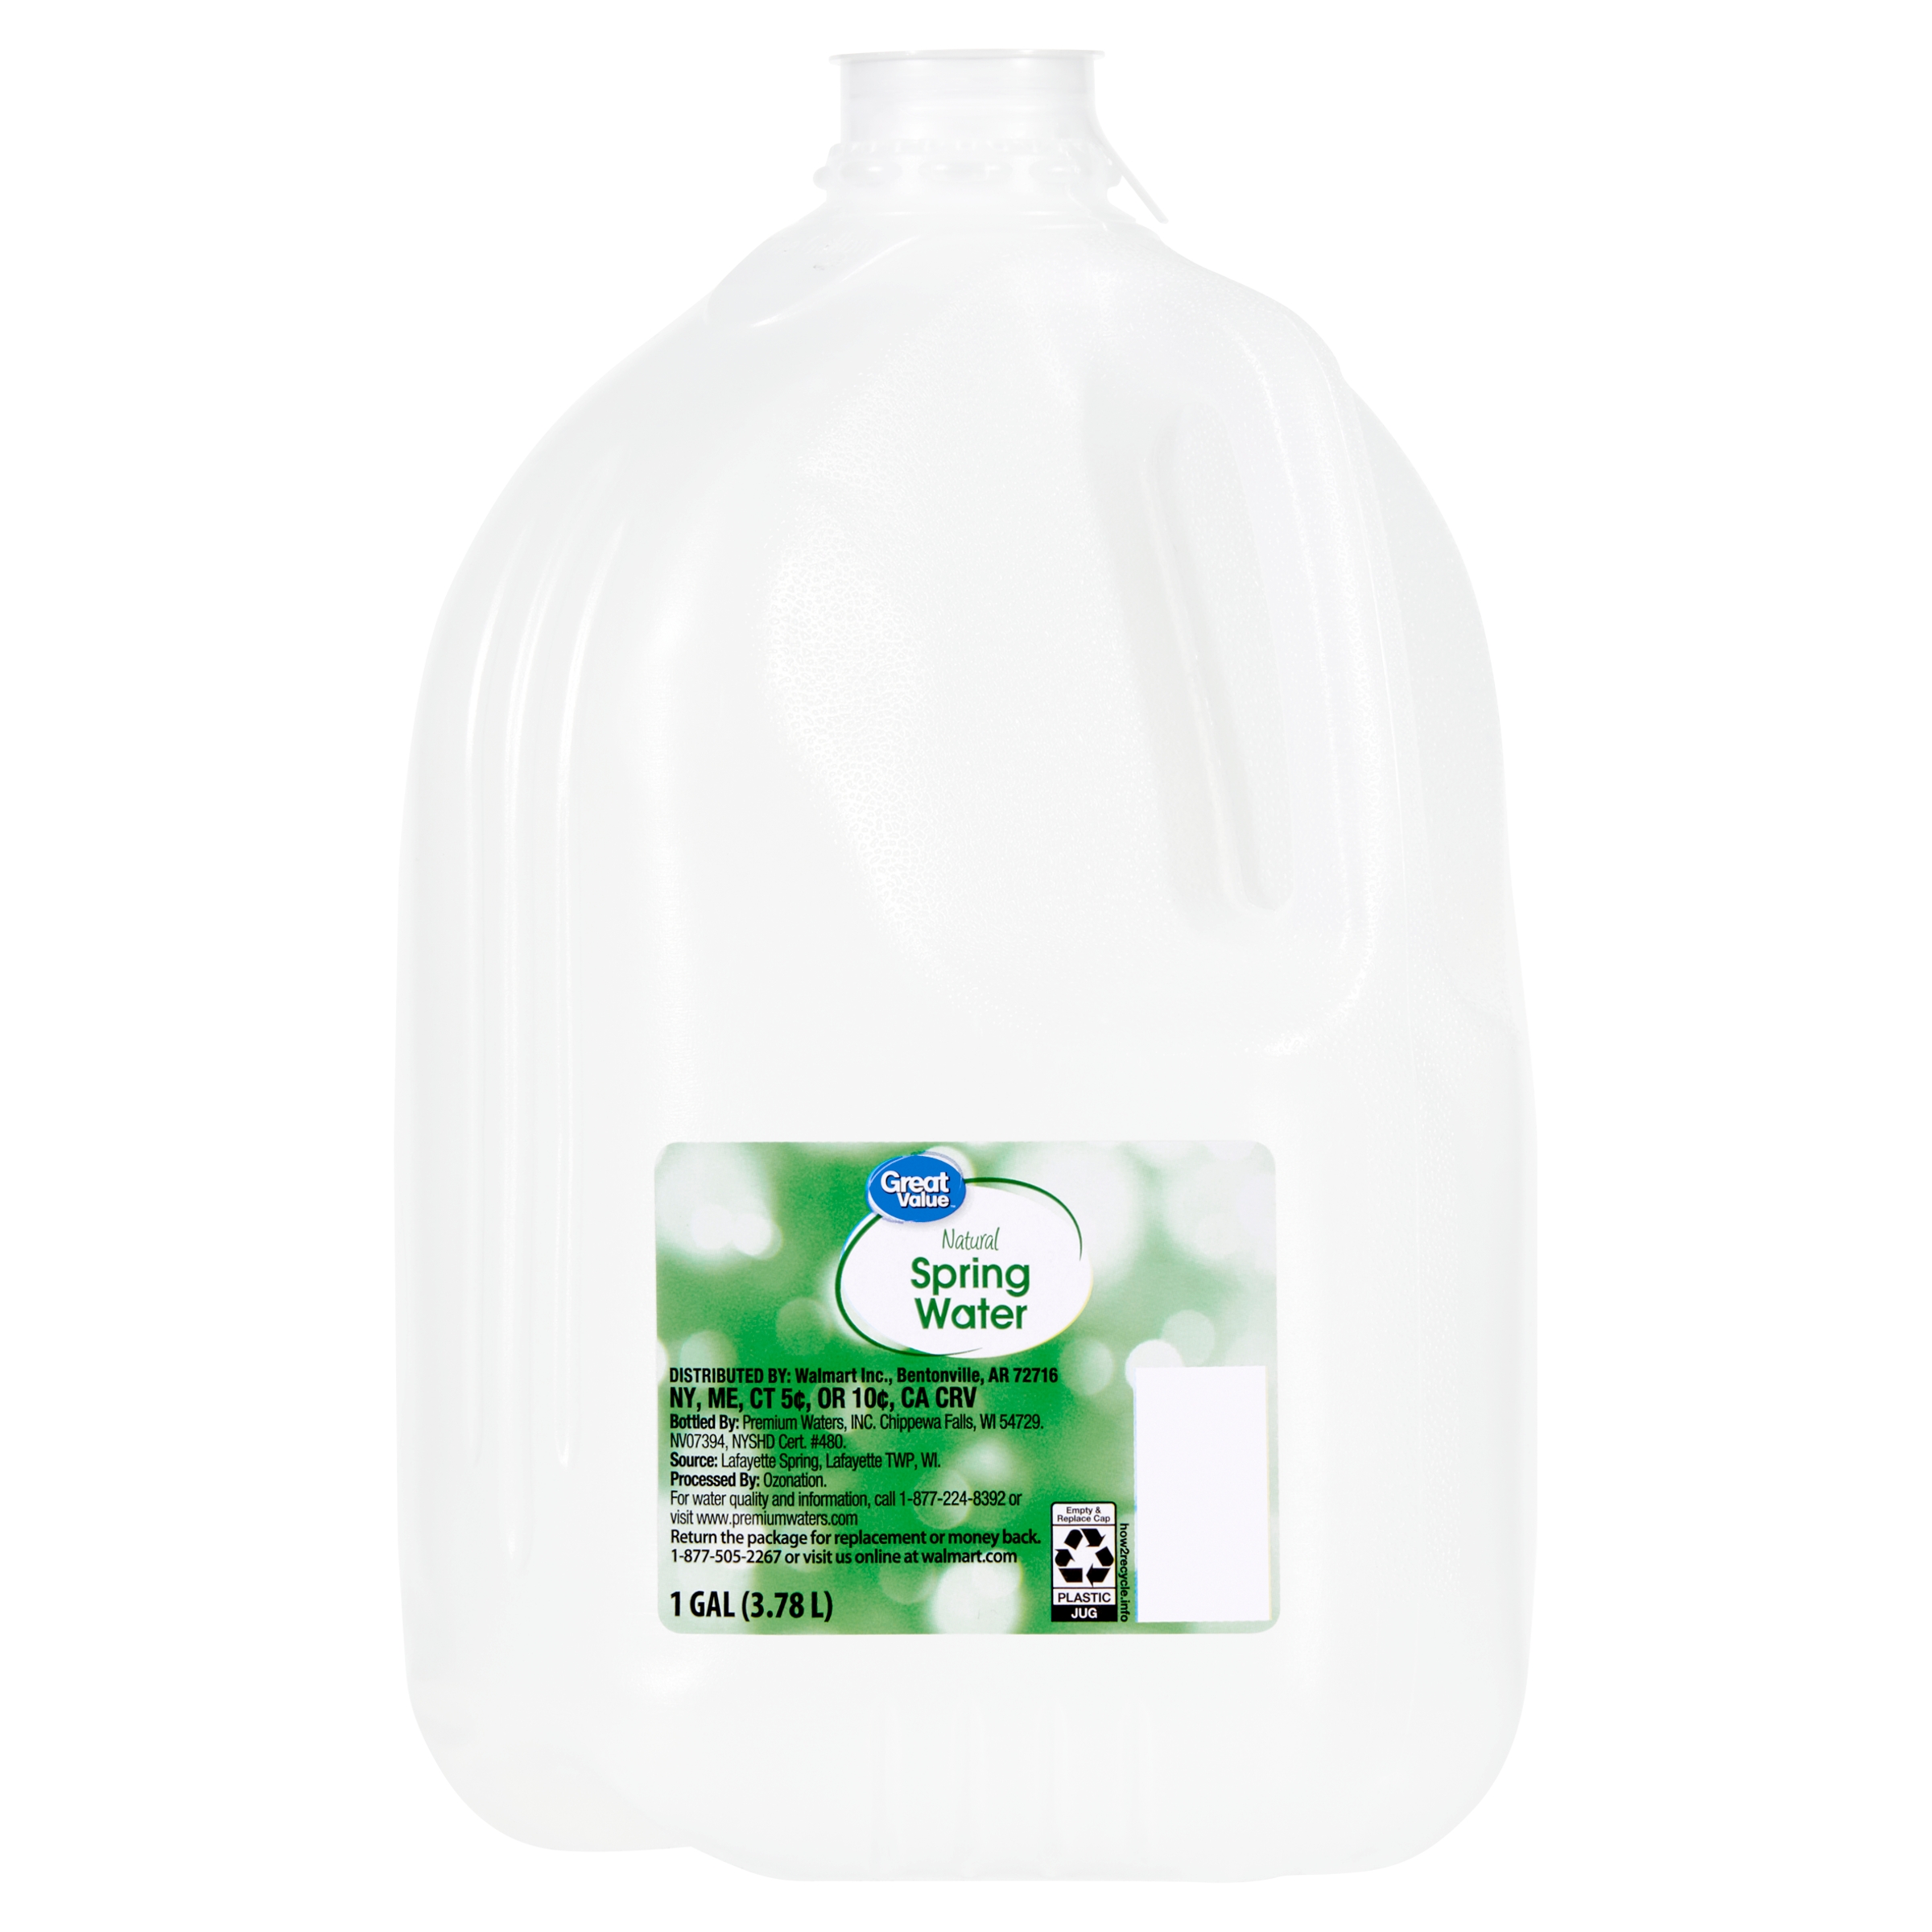 Great Value Spring Water, 1 Gallon - image 1 of 7